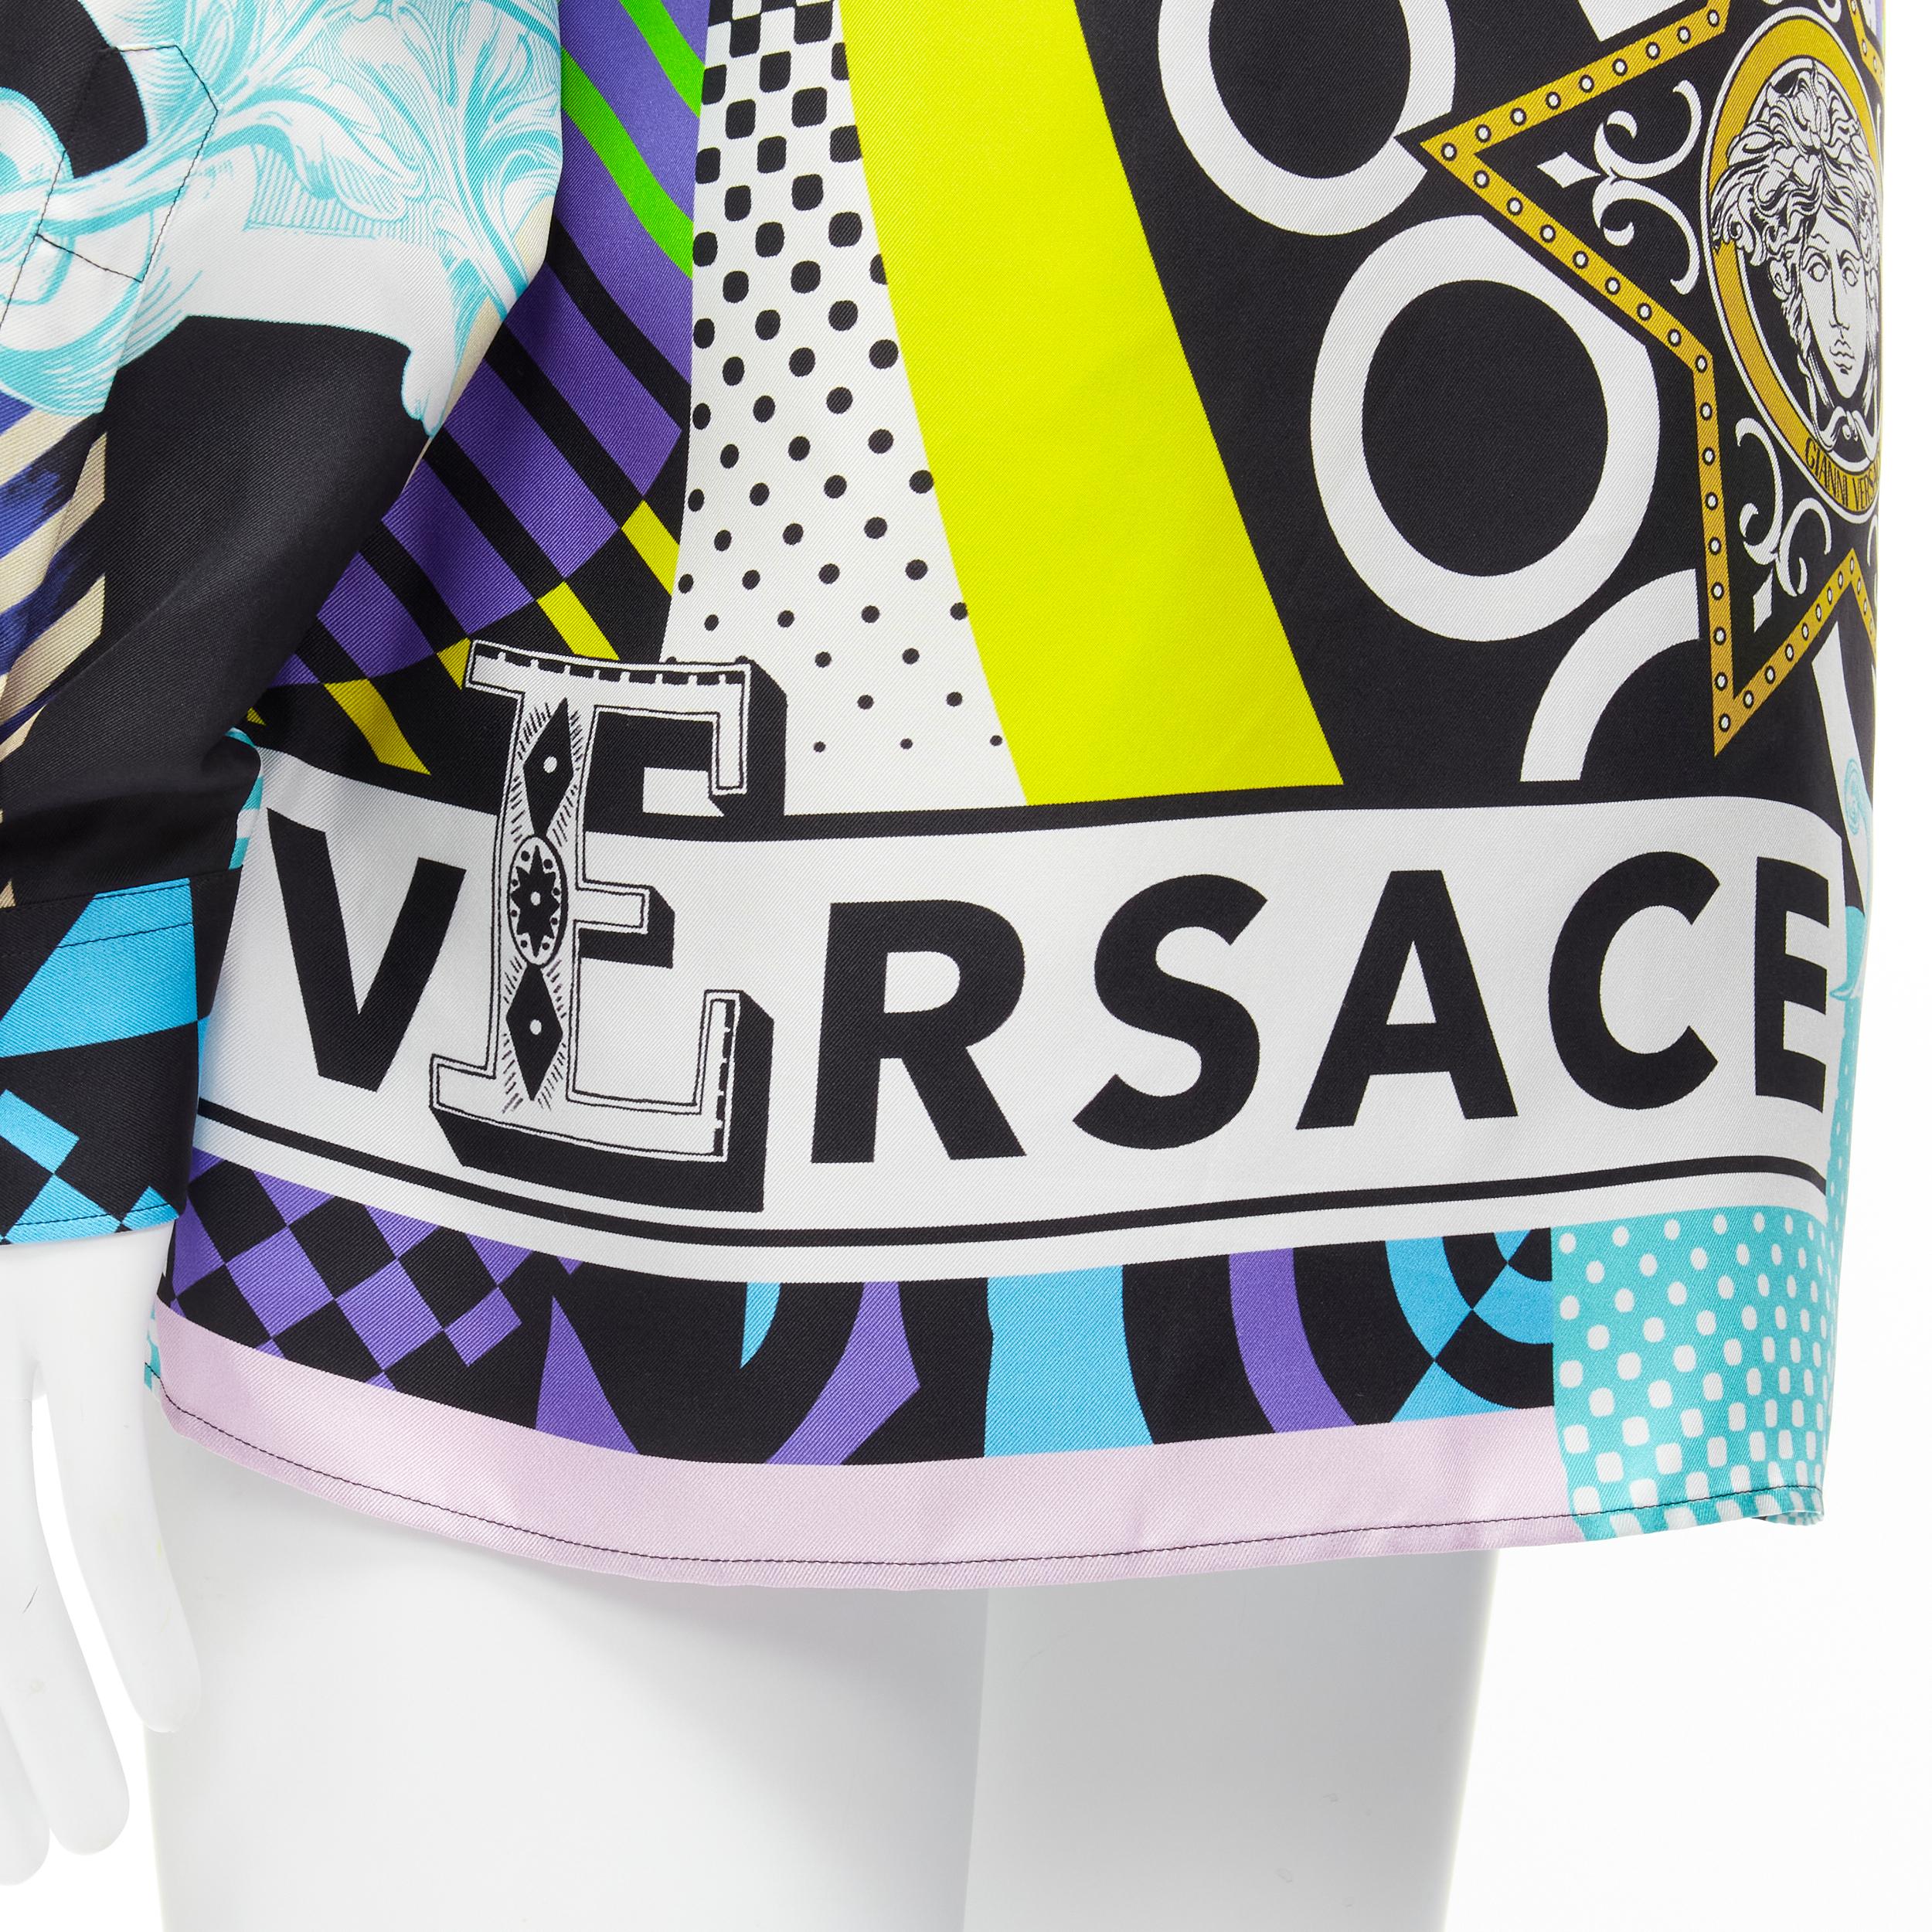 new VERSACE 2020 Barocco Acanthus Pop Print Limited silk shirt EU40 M 
Reference: TGAS/C00009 
Brand: Versace 
Designer: Donatella Versace 
Collection: 2020 
Capsule: Pop Acanthus Runway 
Material: Silk 
Color: Multicolor 
Pattern: Floral 
Closure: